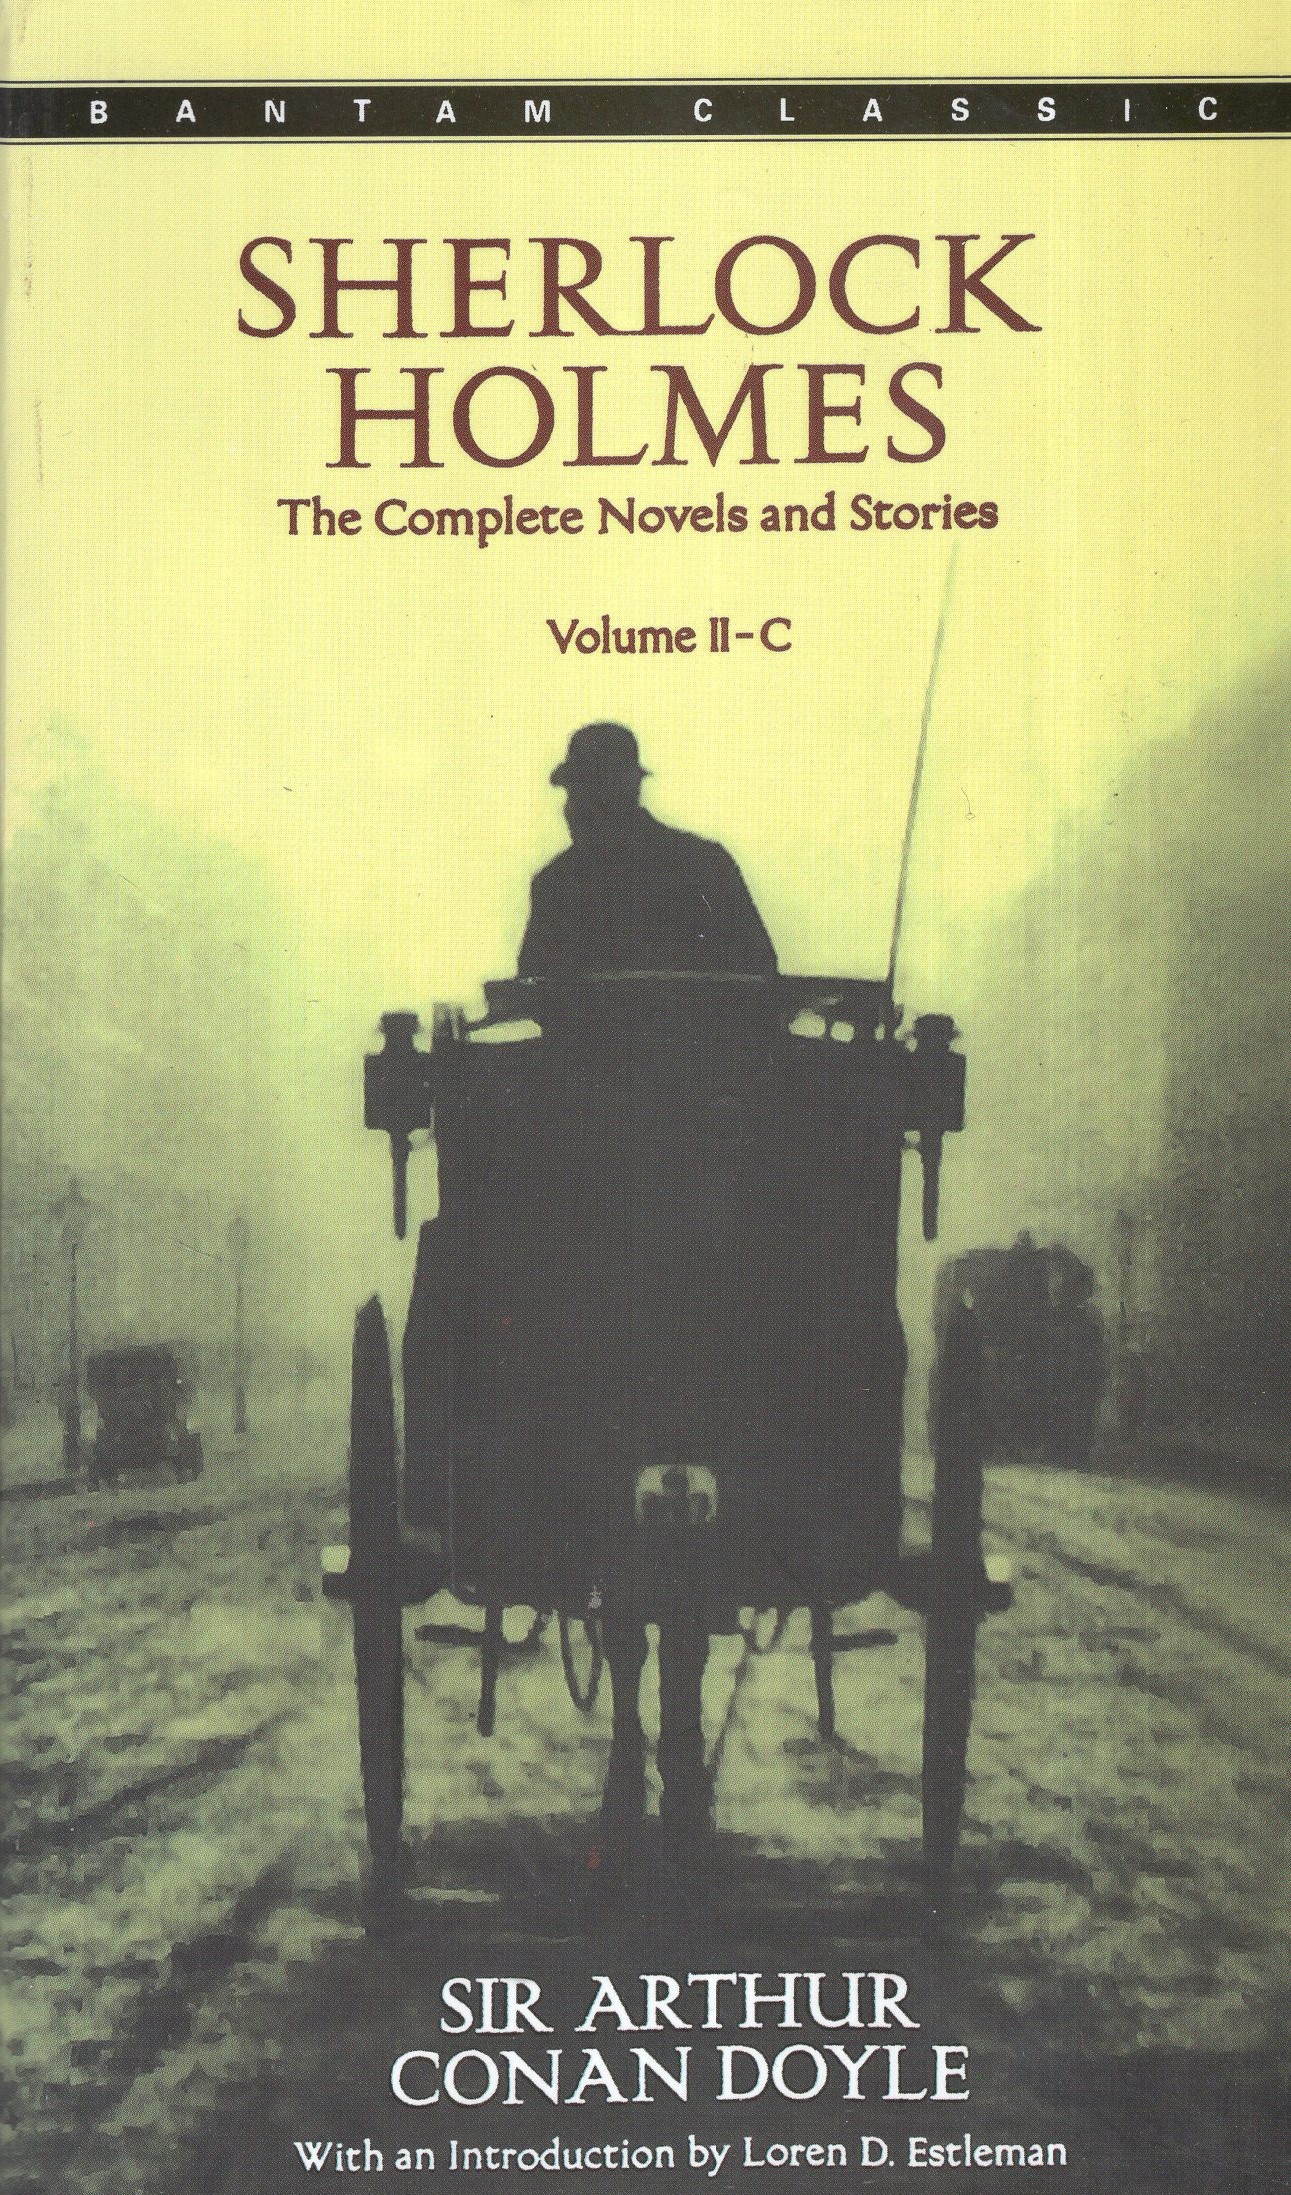 Sherlock Holmes C The Complete Novels and Stories شرلوک هولمز(‌Bantam Classic)